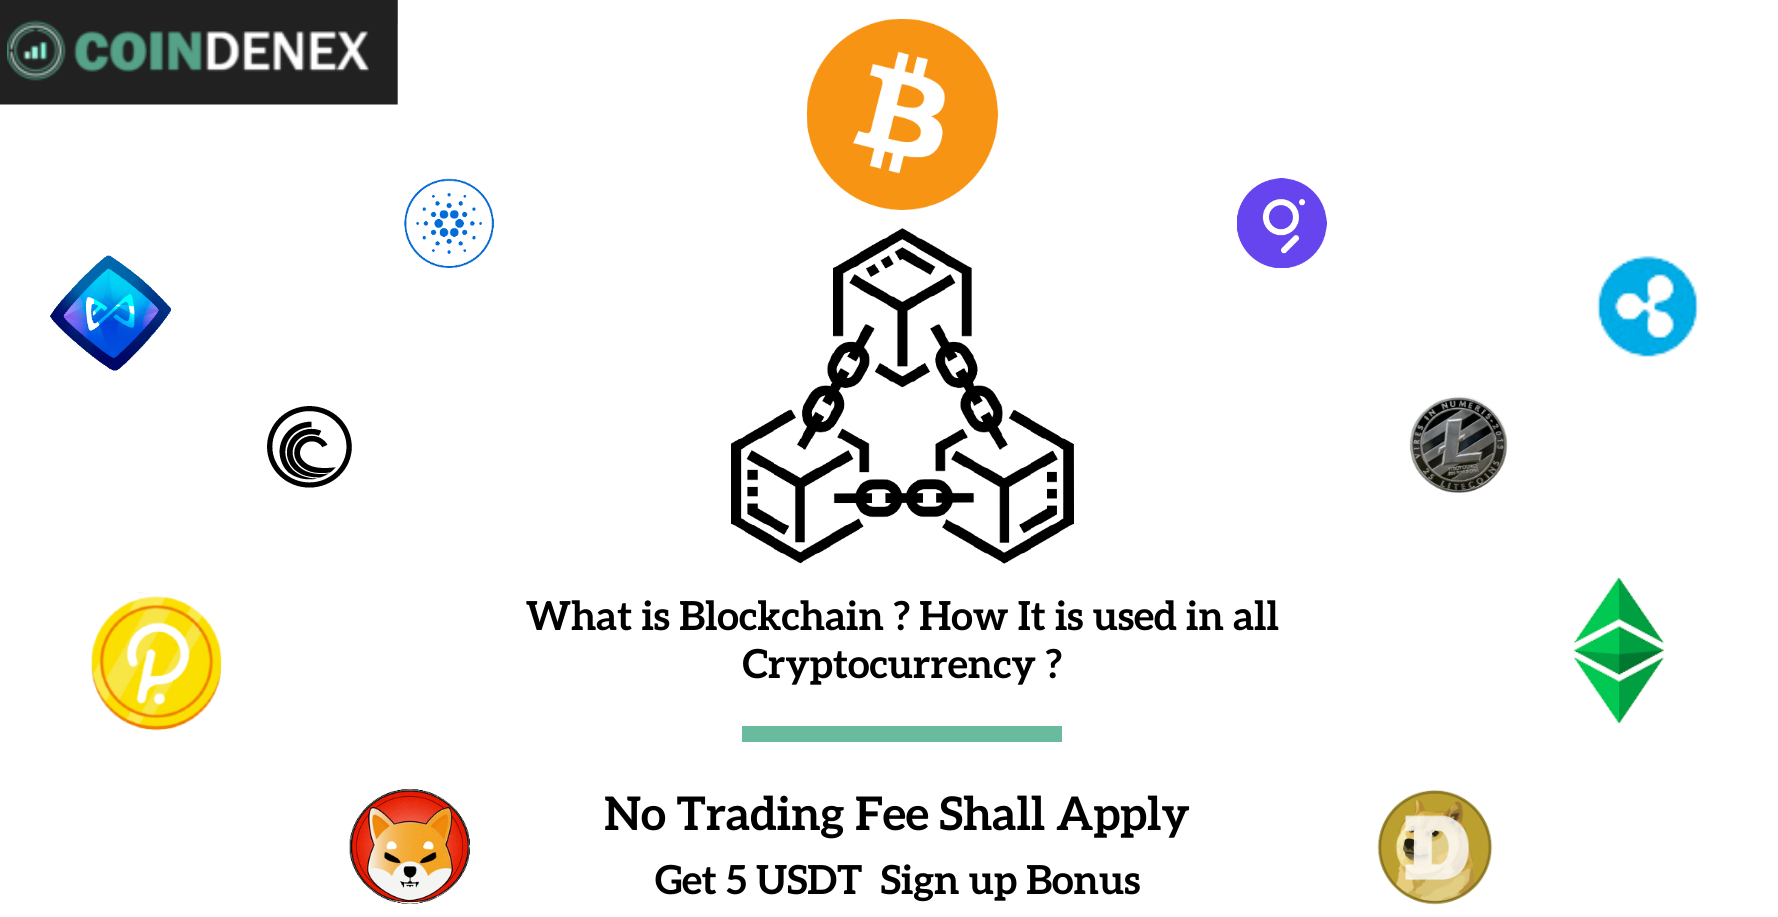 Blockchain & Cryptocurrency explained